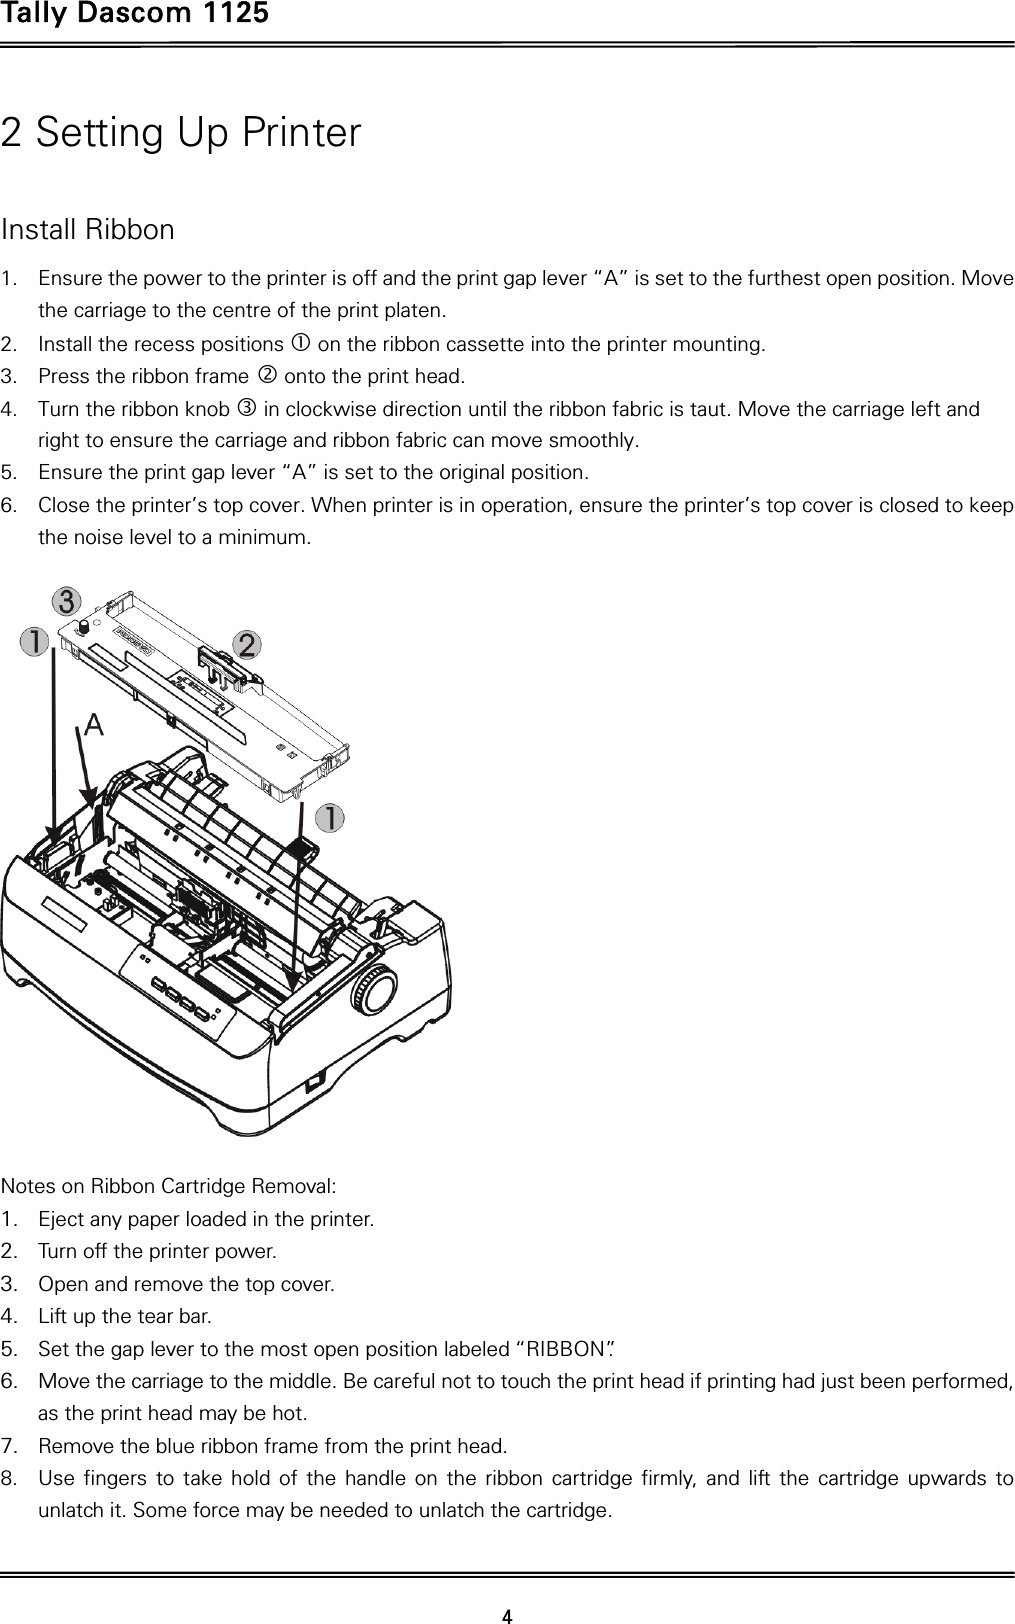 Tally Dascom 1125 42 Setting Up Printer  Install Ribbon 1. Ensure the power to the printer is off and the print gap lever “A” is set to the furthest open position. Move the carriage to the centre of the print platen. 2. Install the recess positions c on the ribbon cassette into the printer mounting. 3. Press the ribbon frame d onto the print head.   4. Turn the ribbon knob e in clockwise direction until the ribbon fabric is taut. Move the carriage left and right to ensure the carriage and ribbon fabric can move smoothly. 5. Ensure the print gap lever “A” is set to the original position.   6. Close the printer’s top cover. When printer is in operation, ensure the printer’s top cover is closed to keep the noise level to a minimum.    Notes on Ribbon Cartridge Removal: 1. Eject any paper loaded in the printer. 2. Turn off the printer power. 3. Open and remove the top cover. 4. Lift up the tear bar.   5. Set the gap lever to the most open position labeled “RIBBON”.   6. Move the carriage to the middle. Be careful not to touch the print head if printing had just been performed, as the print head may be hot. 7. Remove the blue ribbon frame from the print head.   8. Use fingers to take hold of the handle on the ribbon cartridge firmly, and lift the cartridge upwards to unlatch it. Some force may be needed to unlatch the cartridge. 